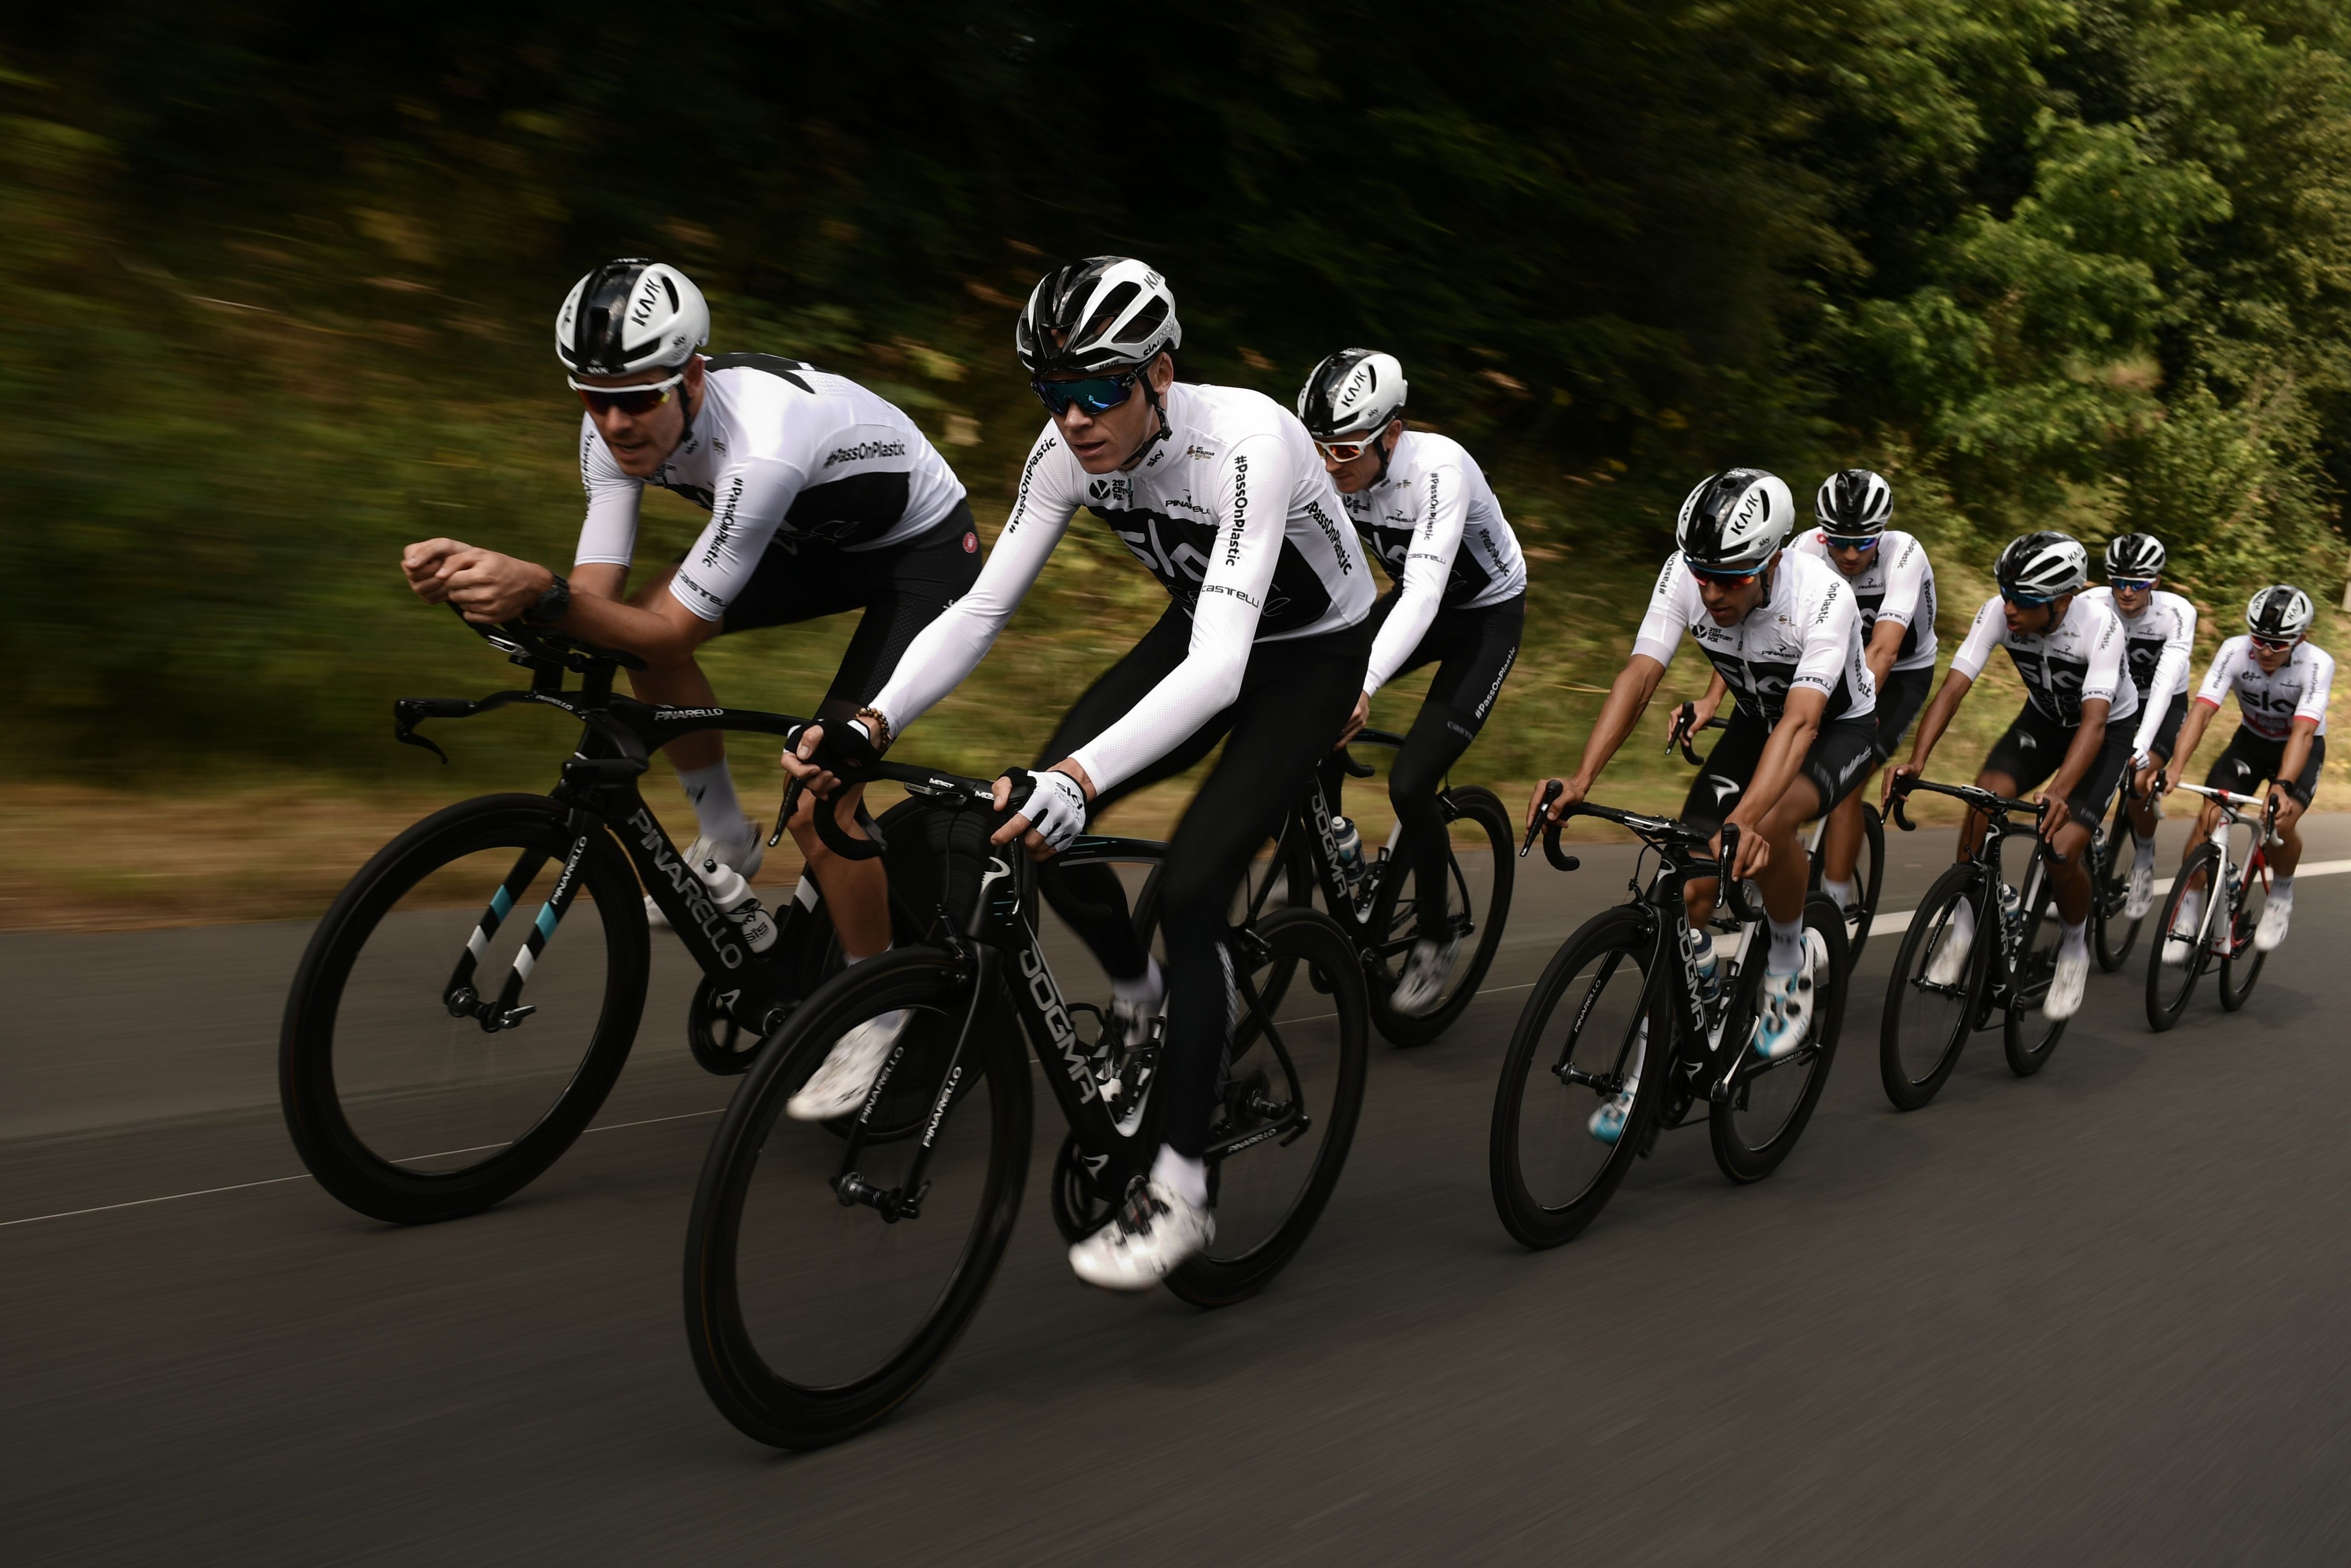 Great Britain's Christopher Froome (Front C), Great Britain's Luke Rowe (L) and their Great Britain's Team Sky cycling team teammates ride during a training session on July 6, 2018 near Saint-Mars la Reorthe, western France, on the eve of the start of the 105th edition of the Tour de France cycling race. (PHILIPPE LOPEZ&mdash;AFP/Getty Images)